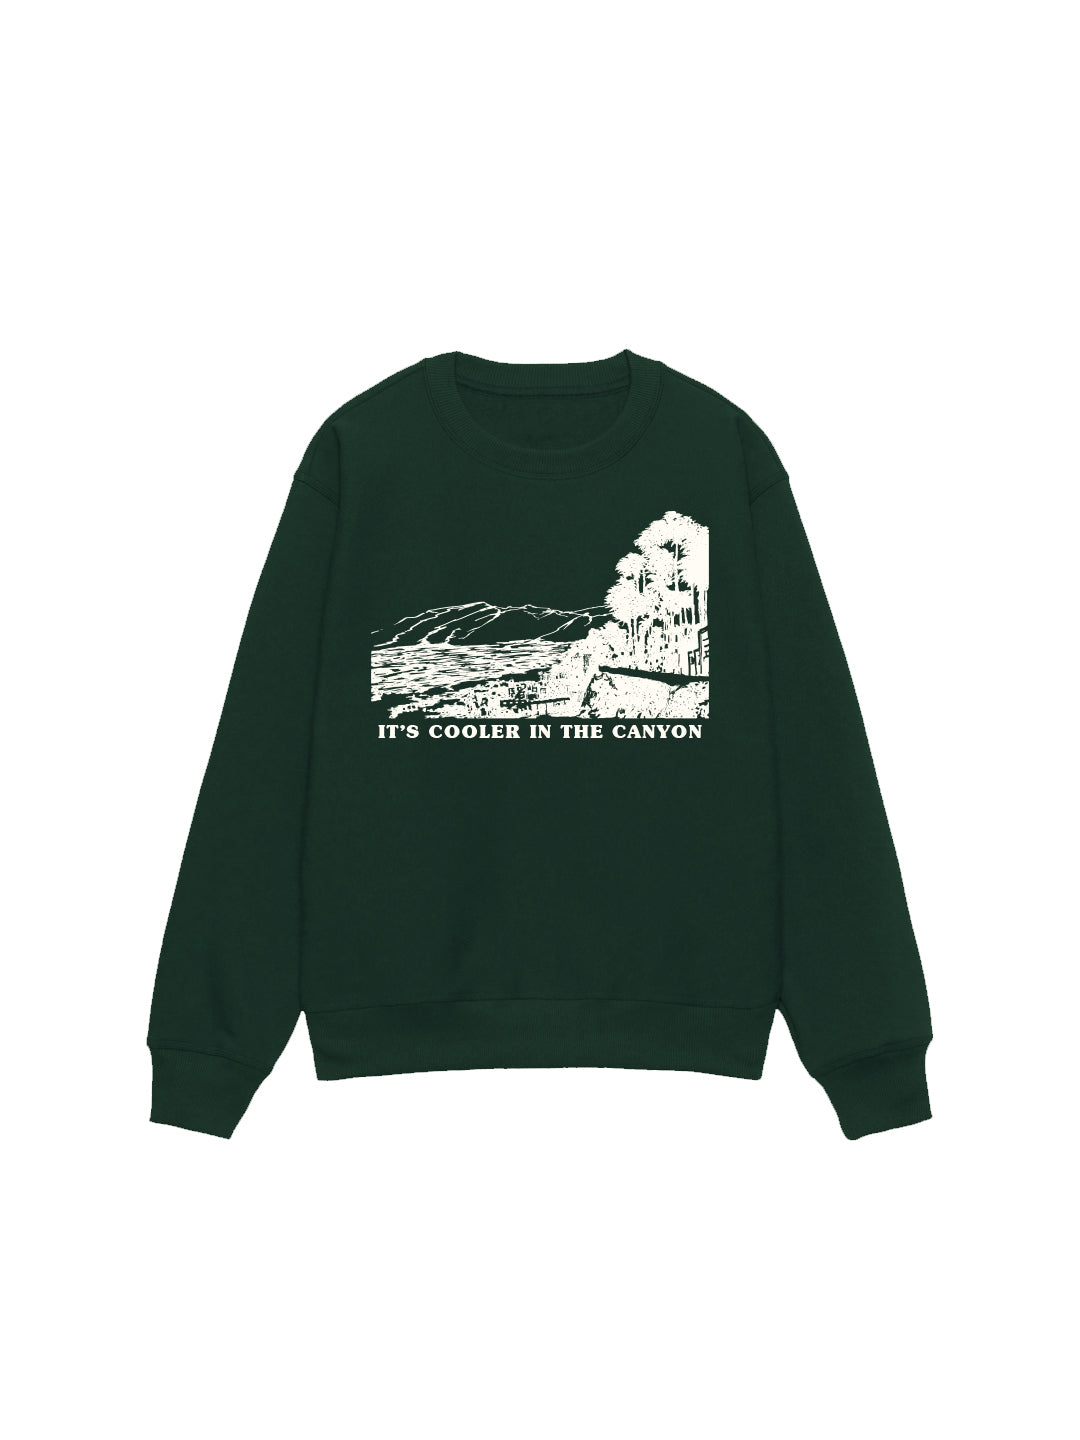 Cooler in the Canyon Sweatshirt in Forest